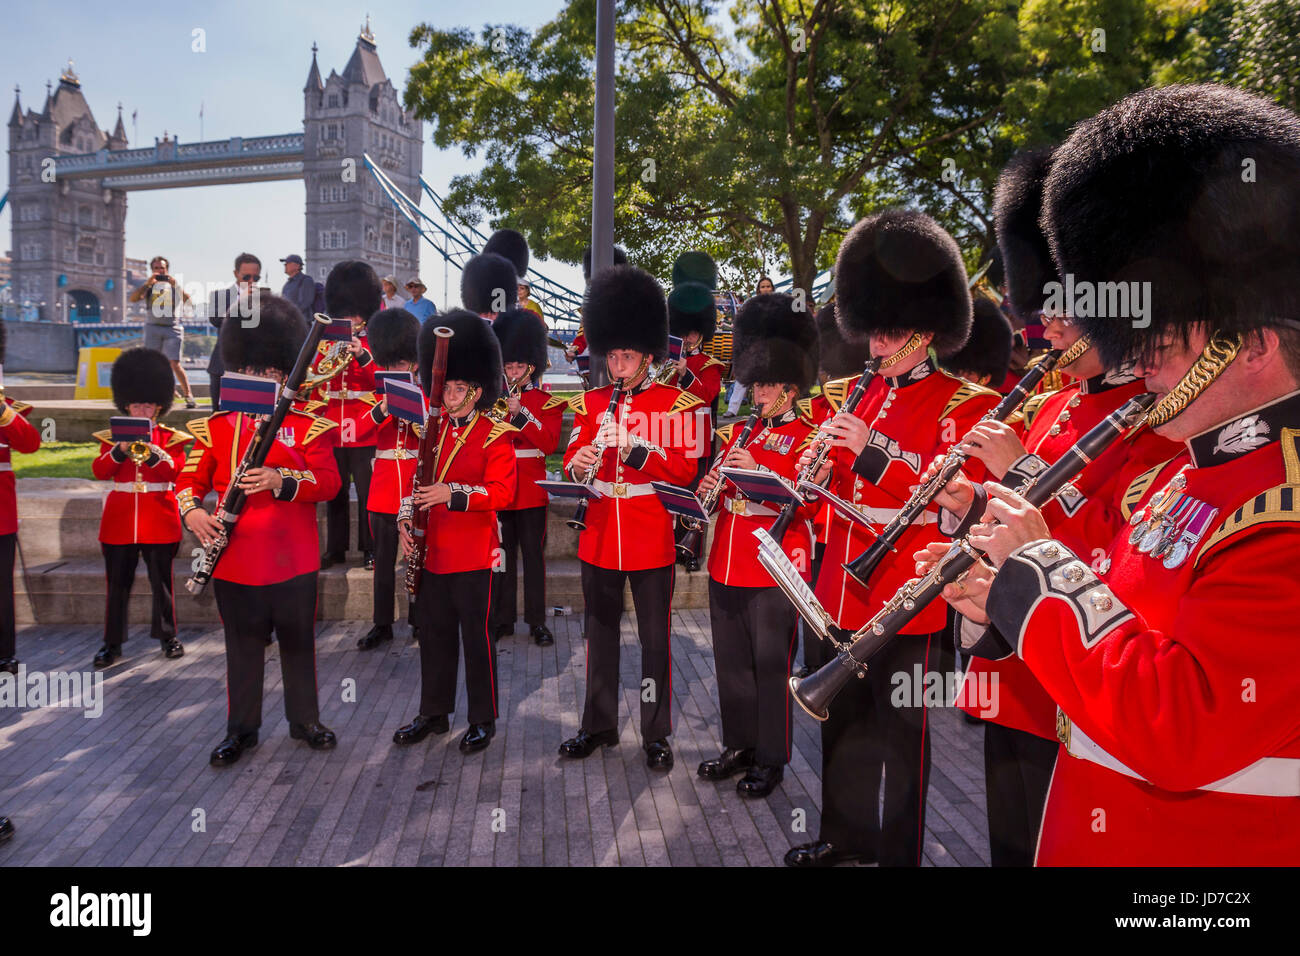 London, UK. 19th June, 2017. The Mayor of London, Sadiq Khan, will be joined by members of the London Assembly, the Royal Navy, Army and Royal Air Force for a flag raising ceremony to show support for the men and women who make up the Armed Forces community, from currently serving troops to Service families, veterans and cadets.   Accompanied by music from the Band of the Scots Guards, the British Armed Forces flag outside City Hall will be raised cadets to commemorate the sacrifices made by those serving the country, in the lead up to Armed Forces Day next Saturday Credit: Guy Bell/Alamy Liv Stock Photo